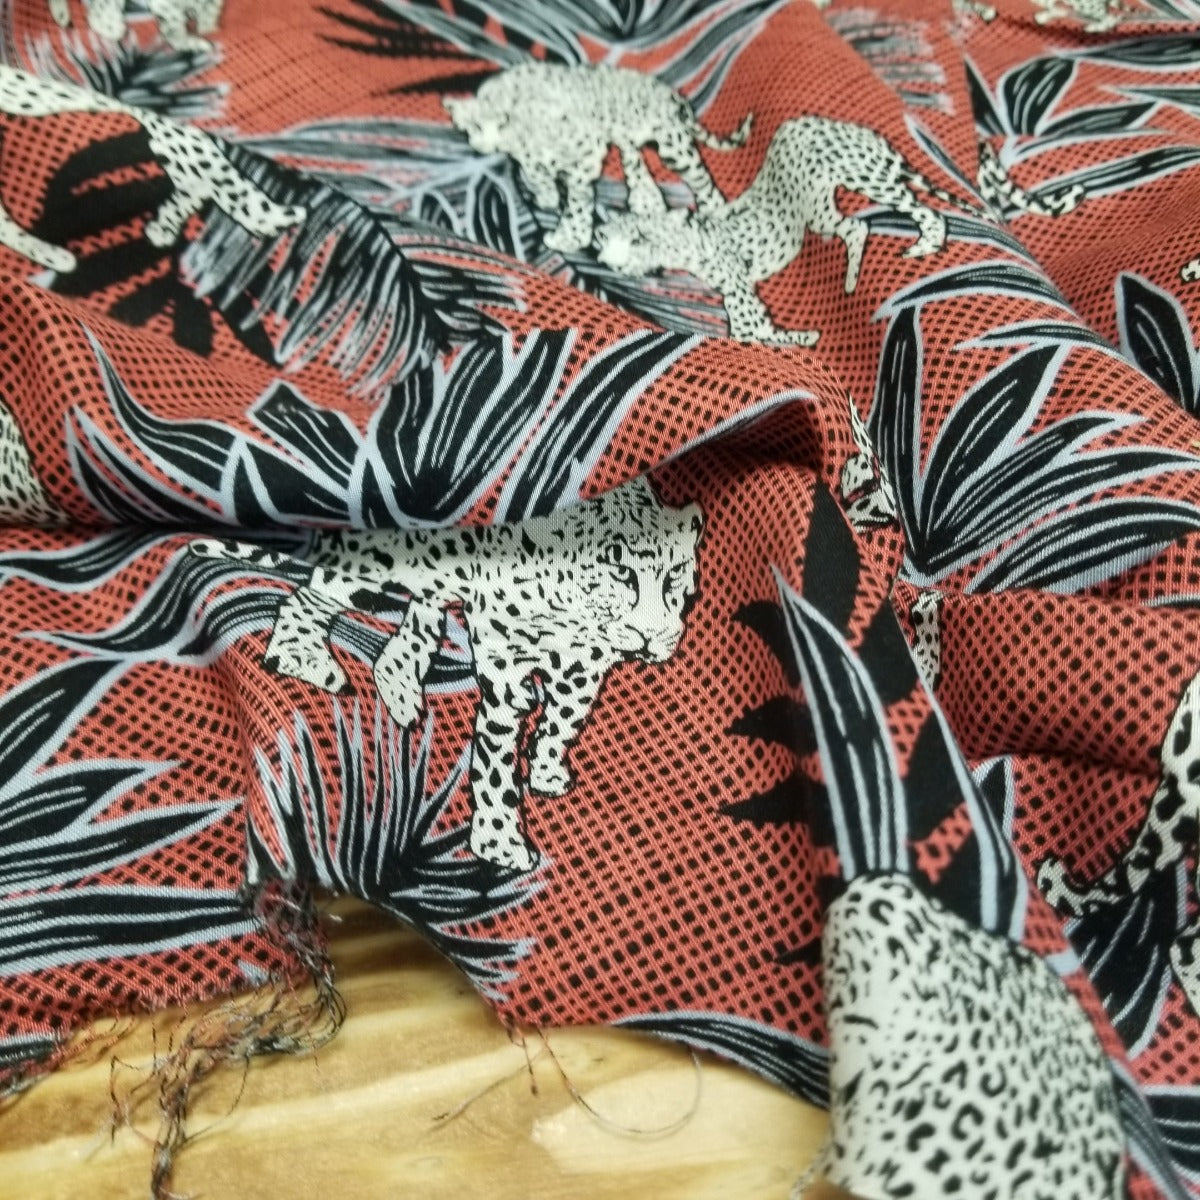 Designer Deadstock Black and Periwinkle Foliage with Cheetahs Rayon Challis Woven- Sold by the yard